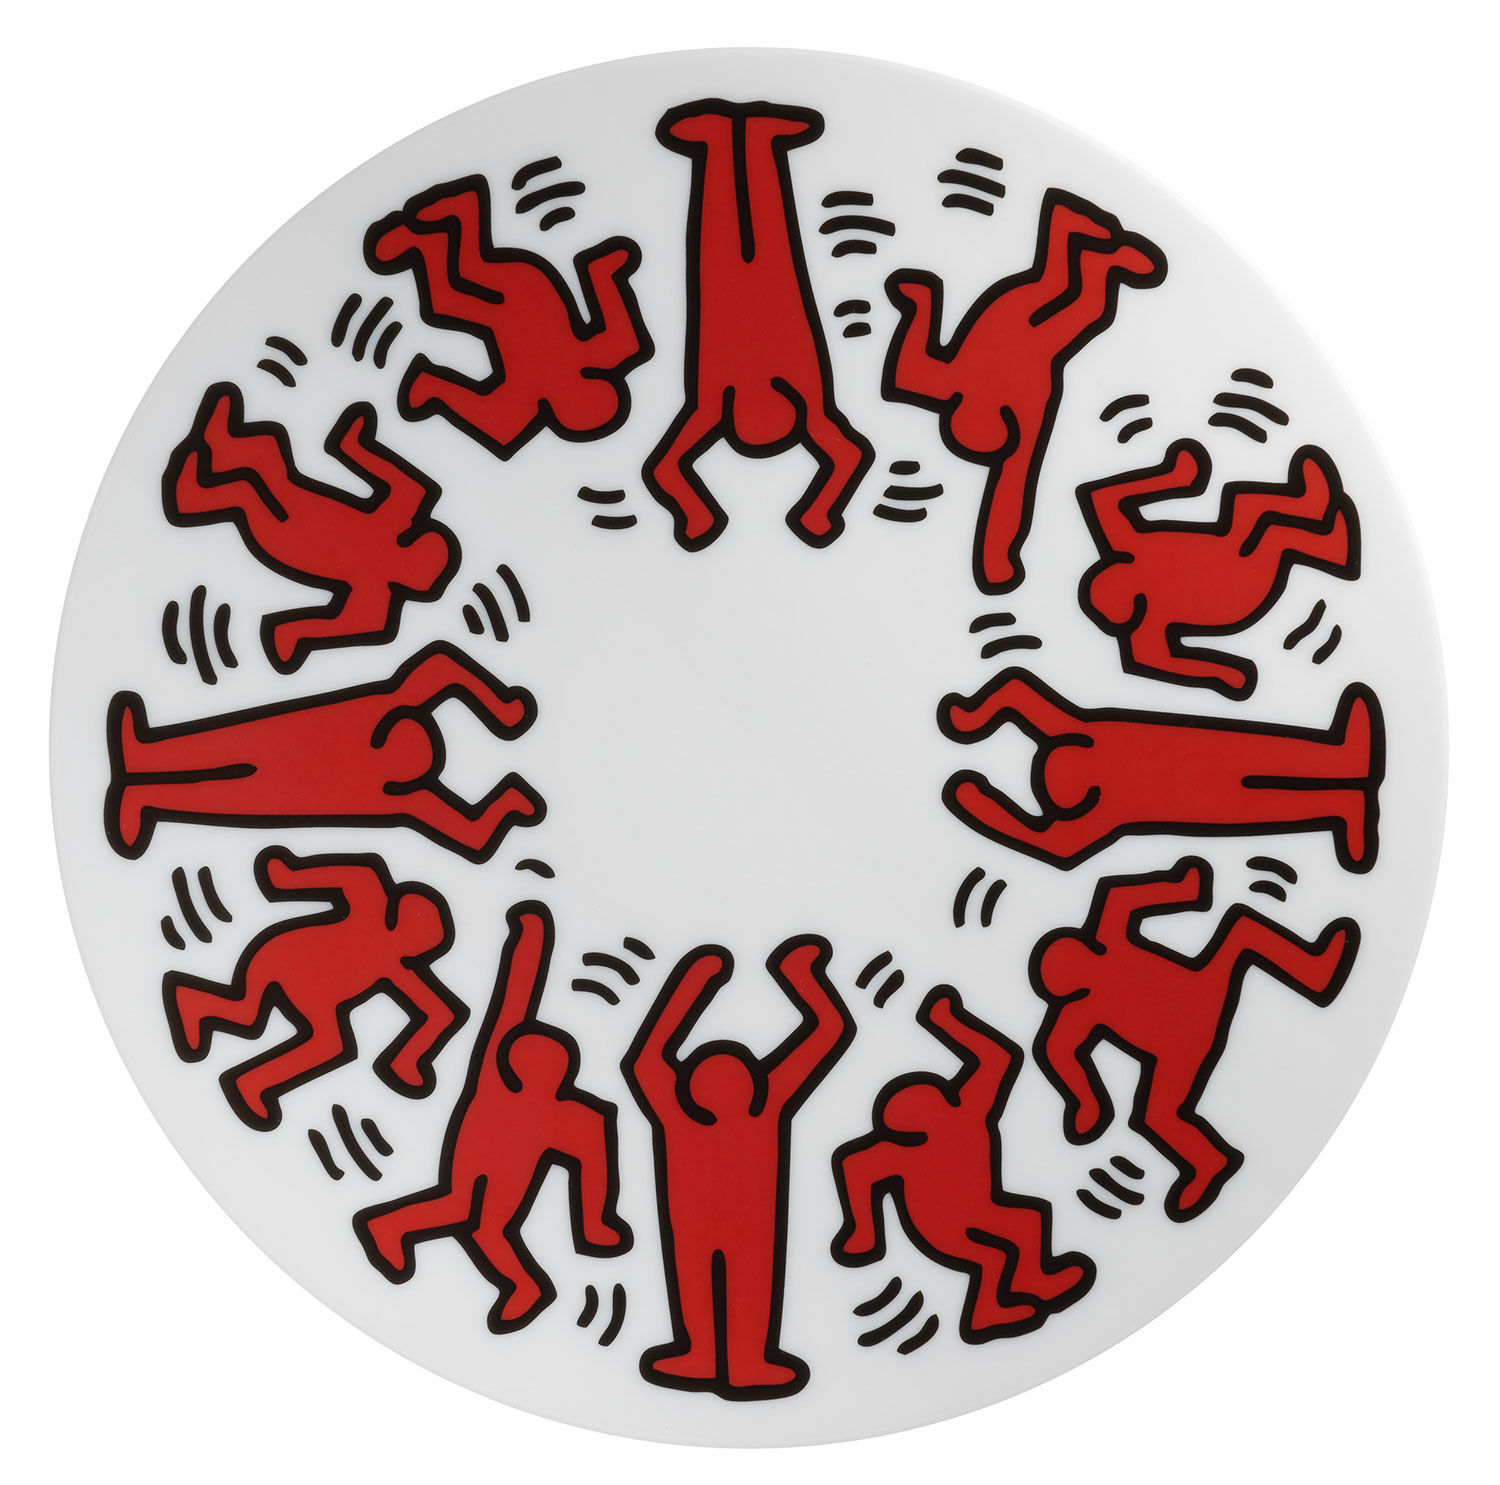 Porcelain plate "Red on White" by Keith Haring